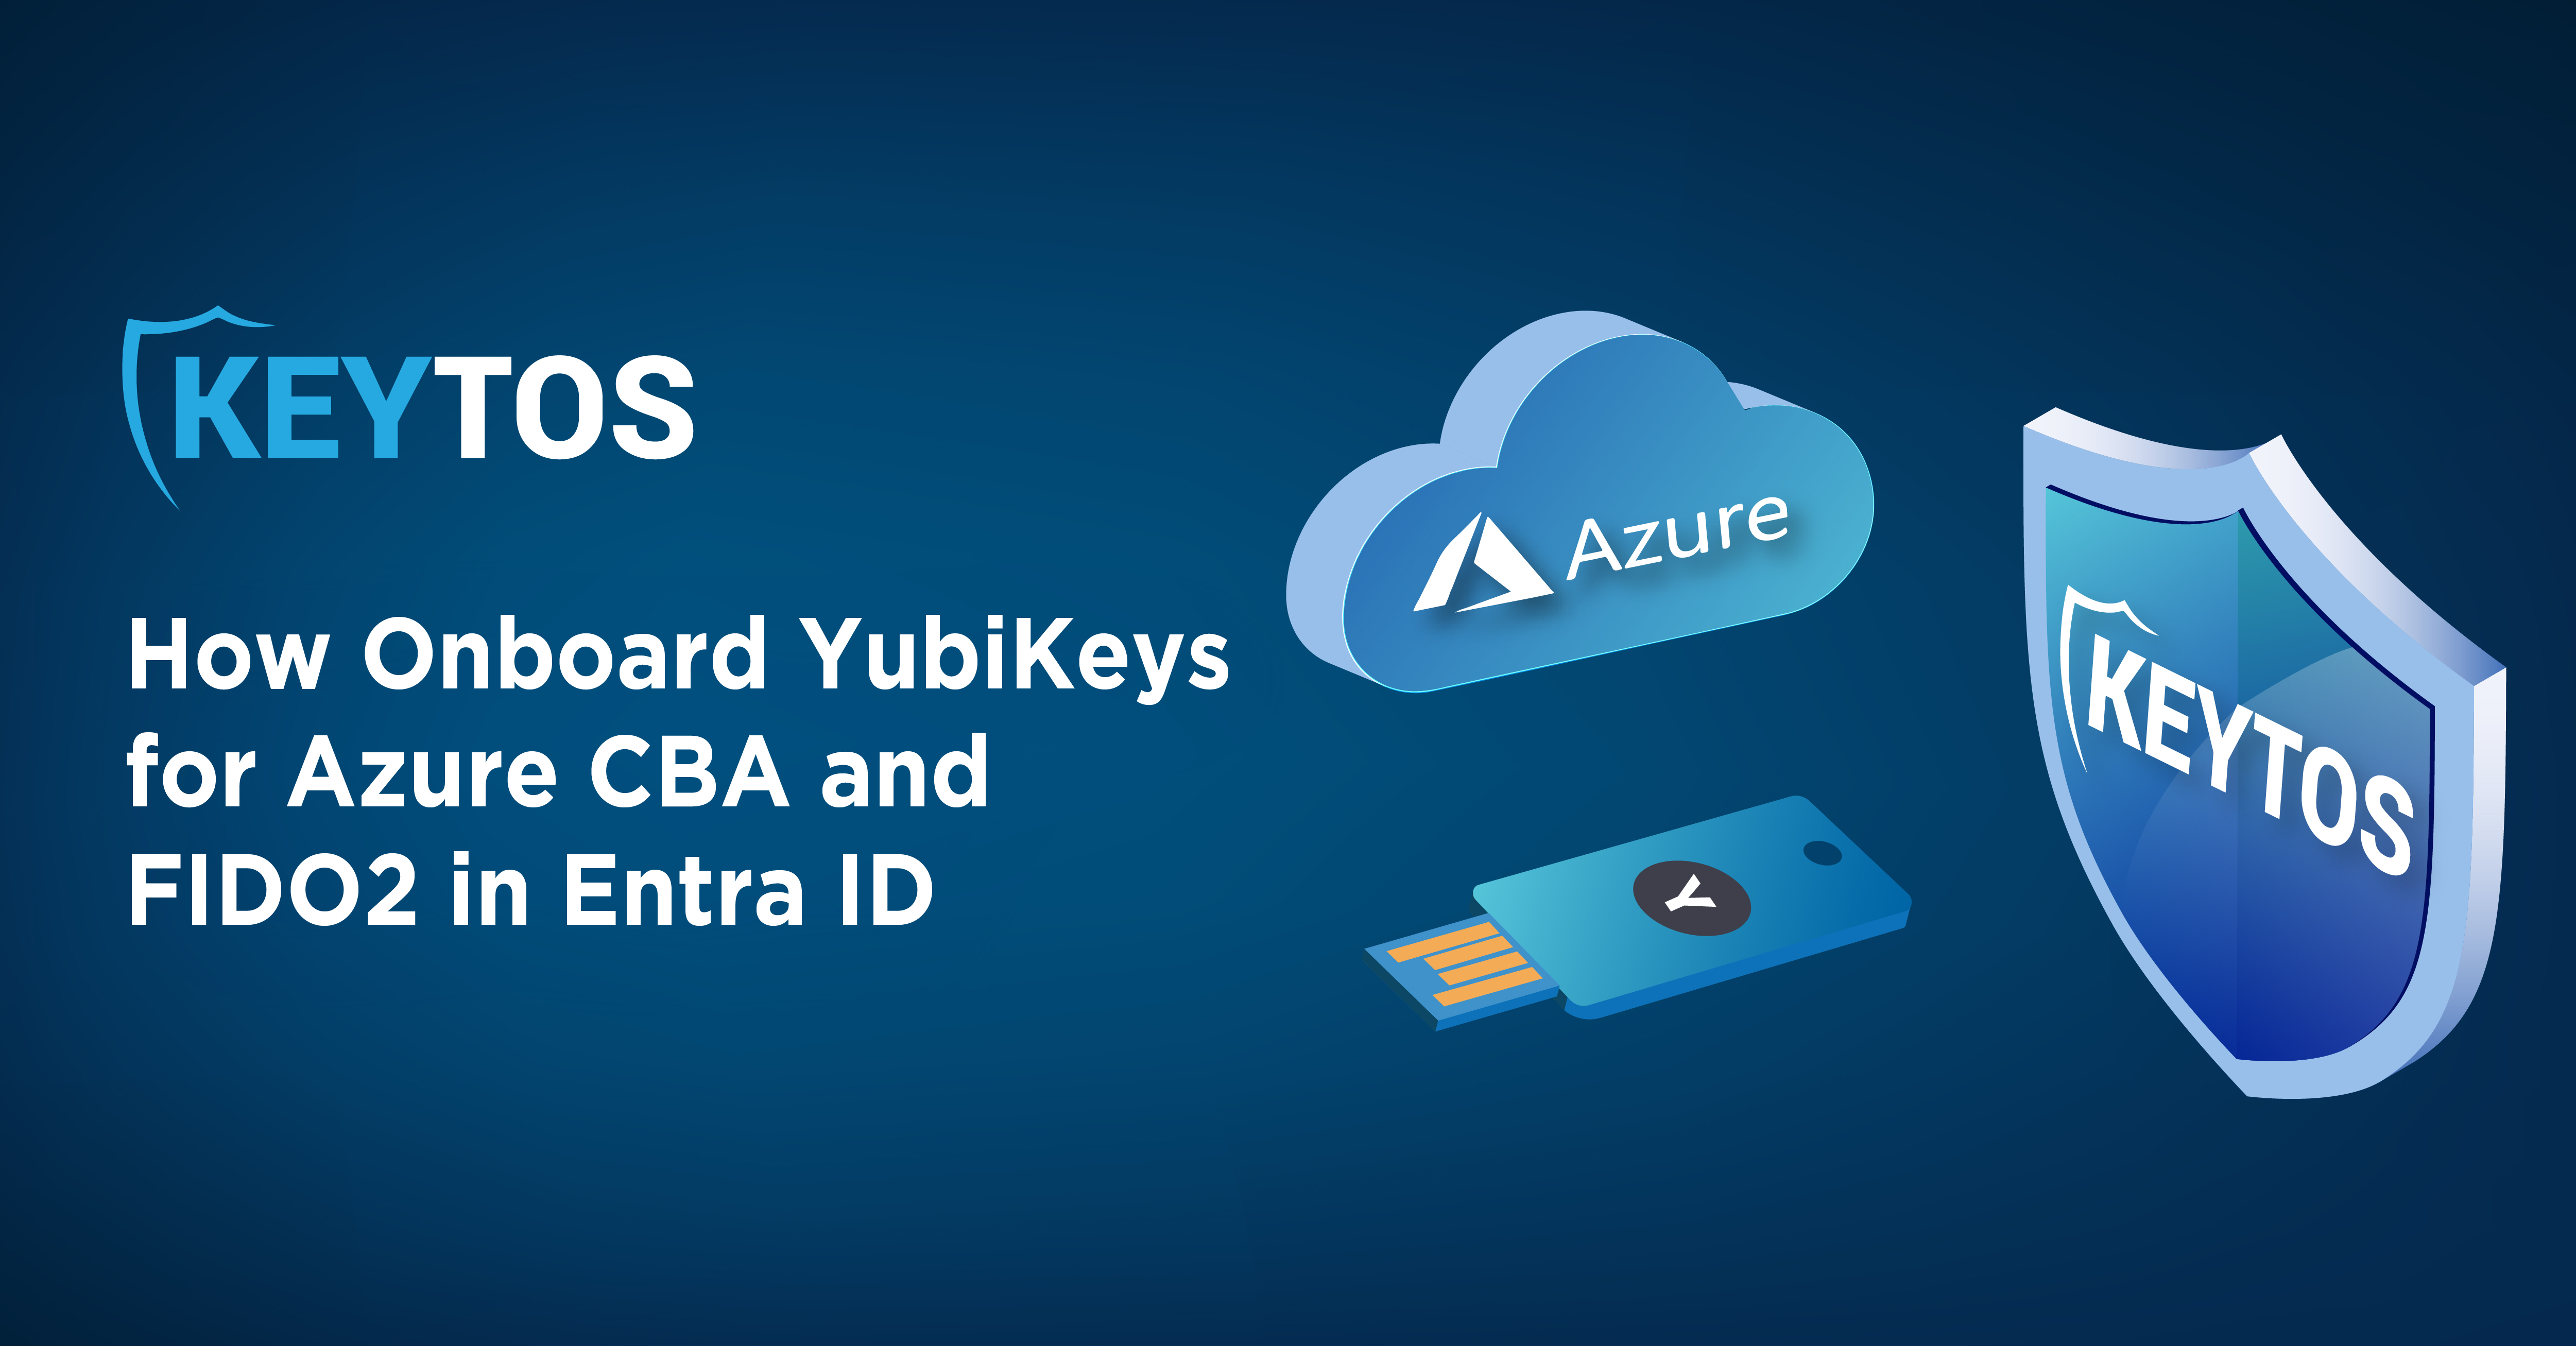 How to onboard yubikeys to azure